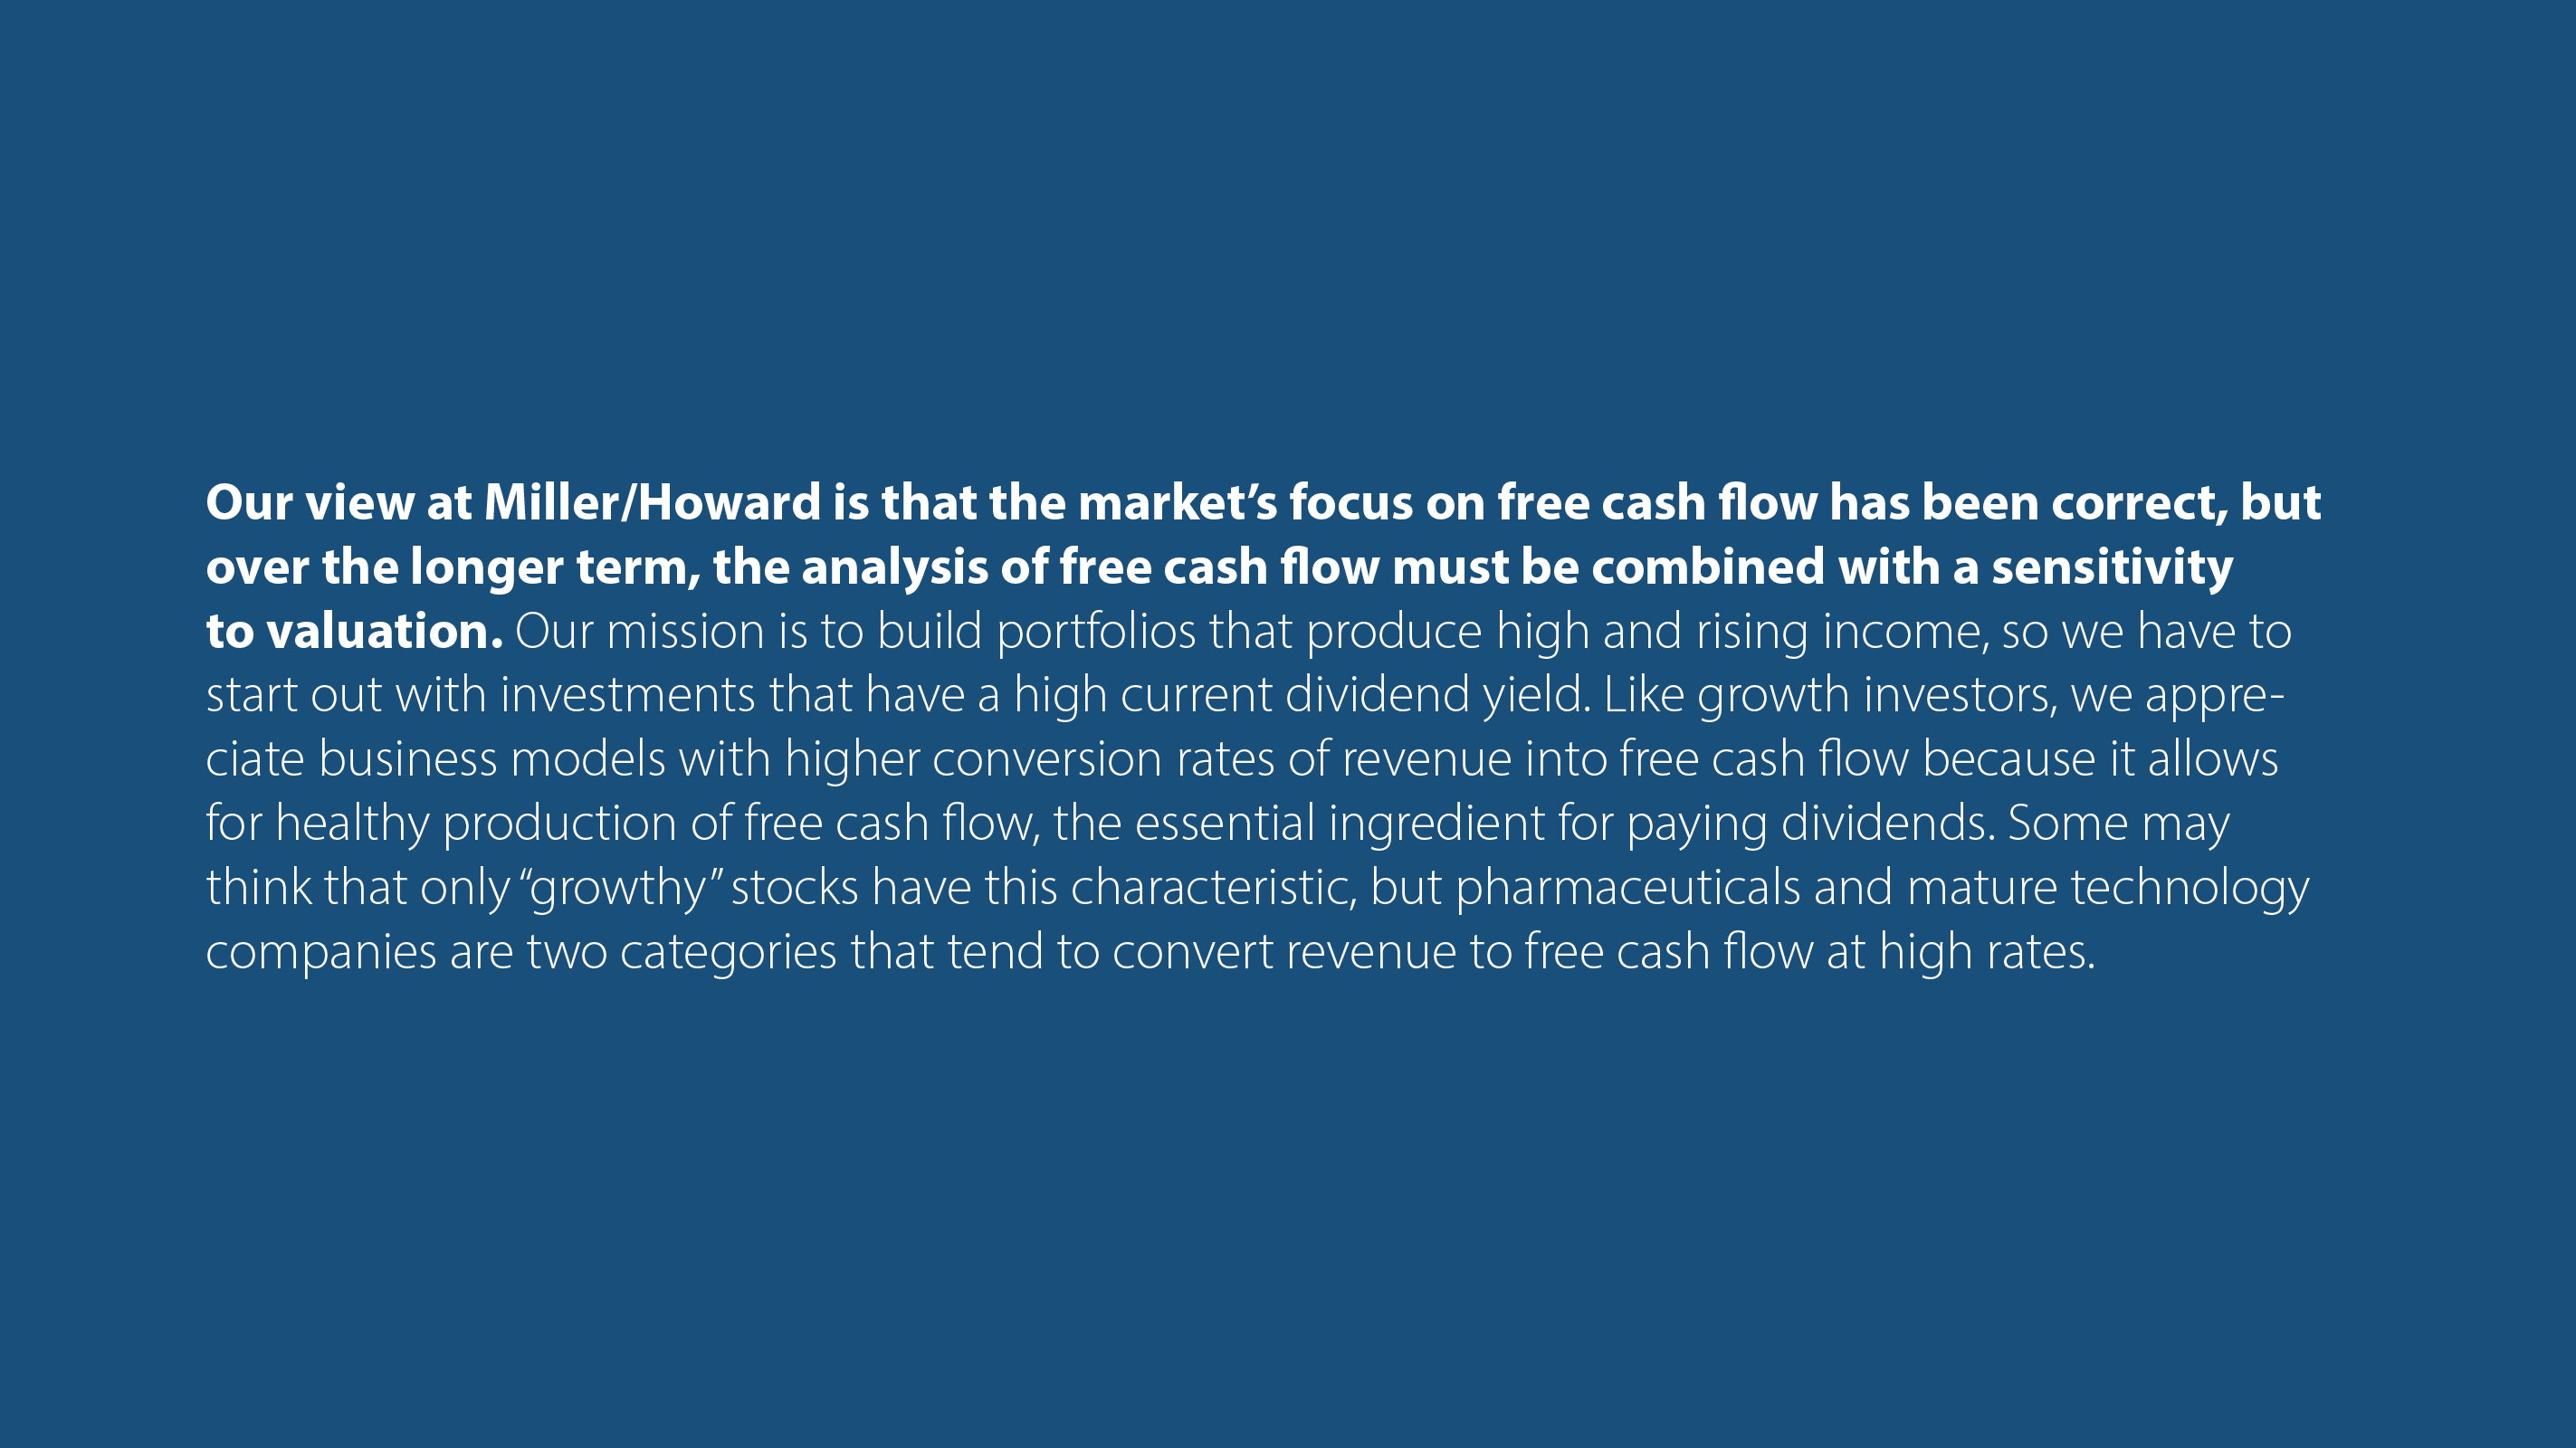 Our view at Miller/Howard is that the market’s focus on free cash flow has been correct